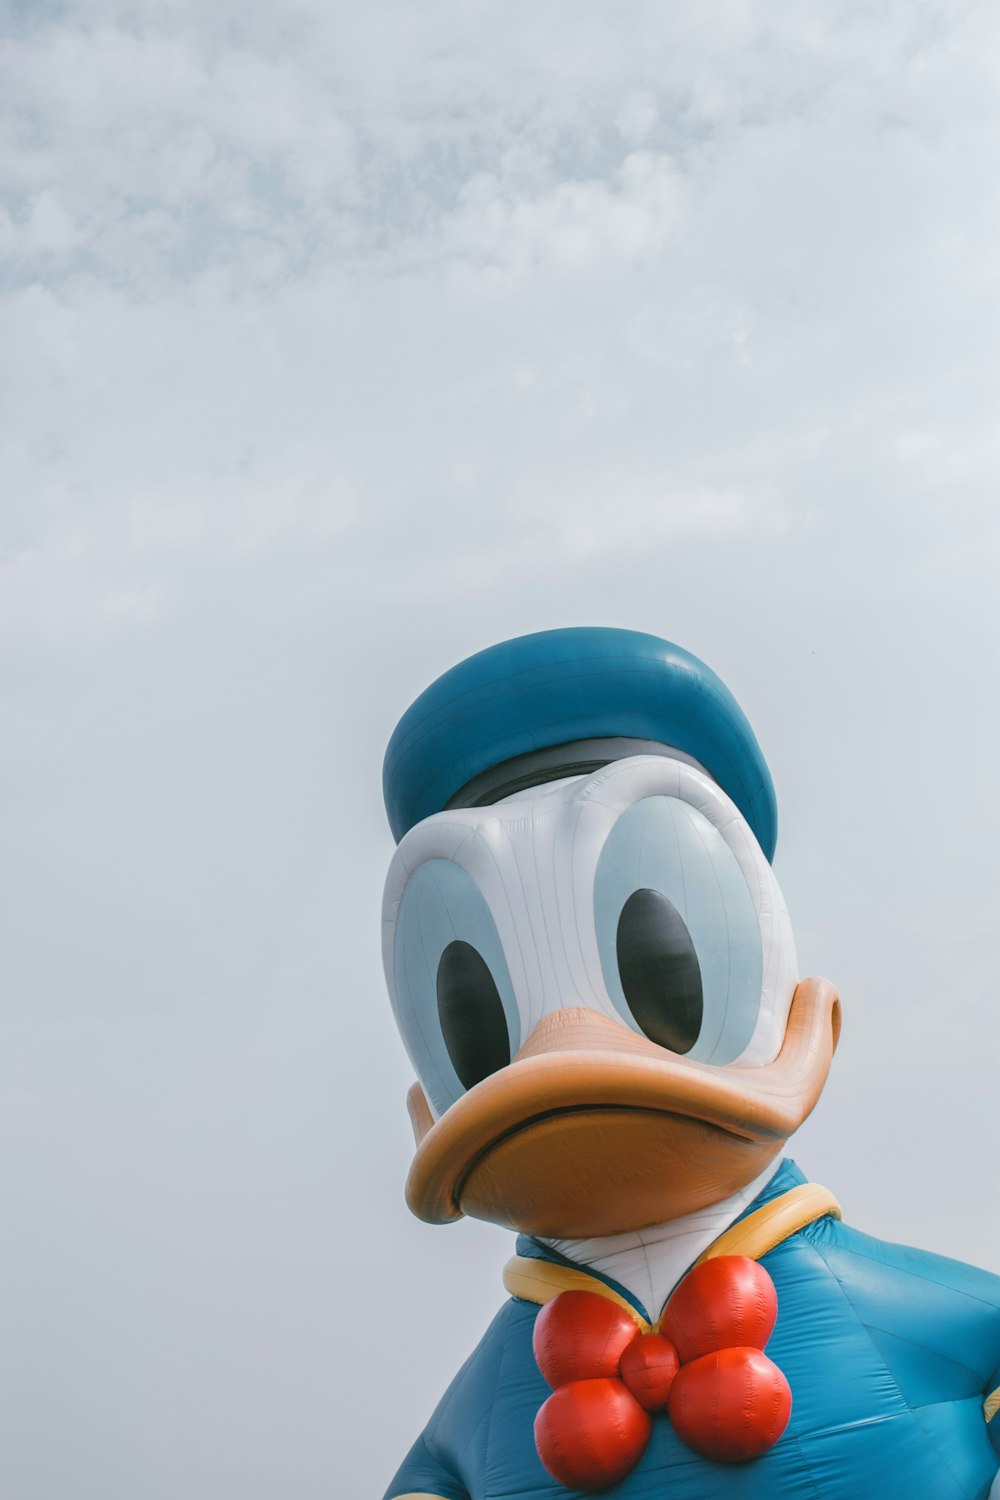 A large duck with a bow tie standing in front of a cloudy sky ...